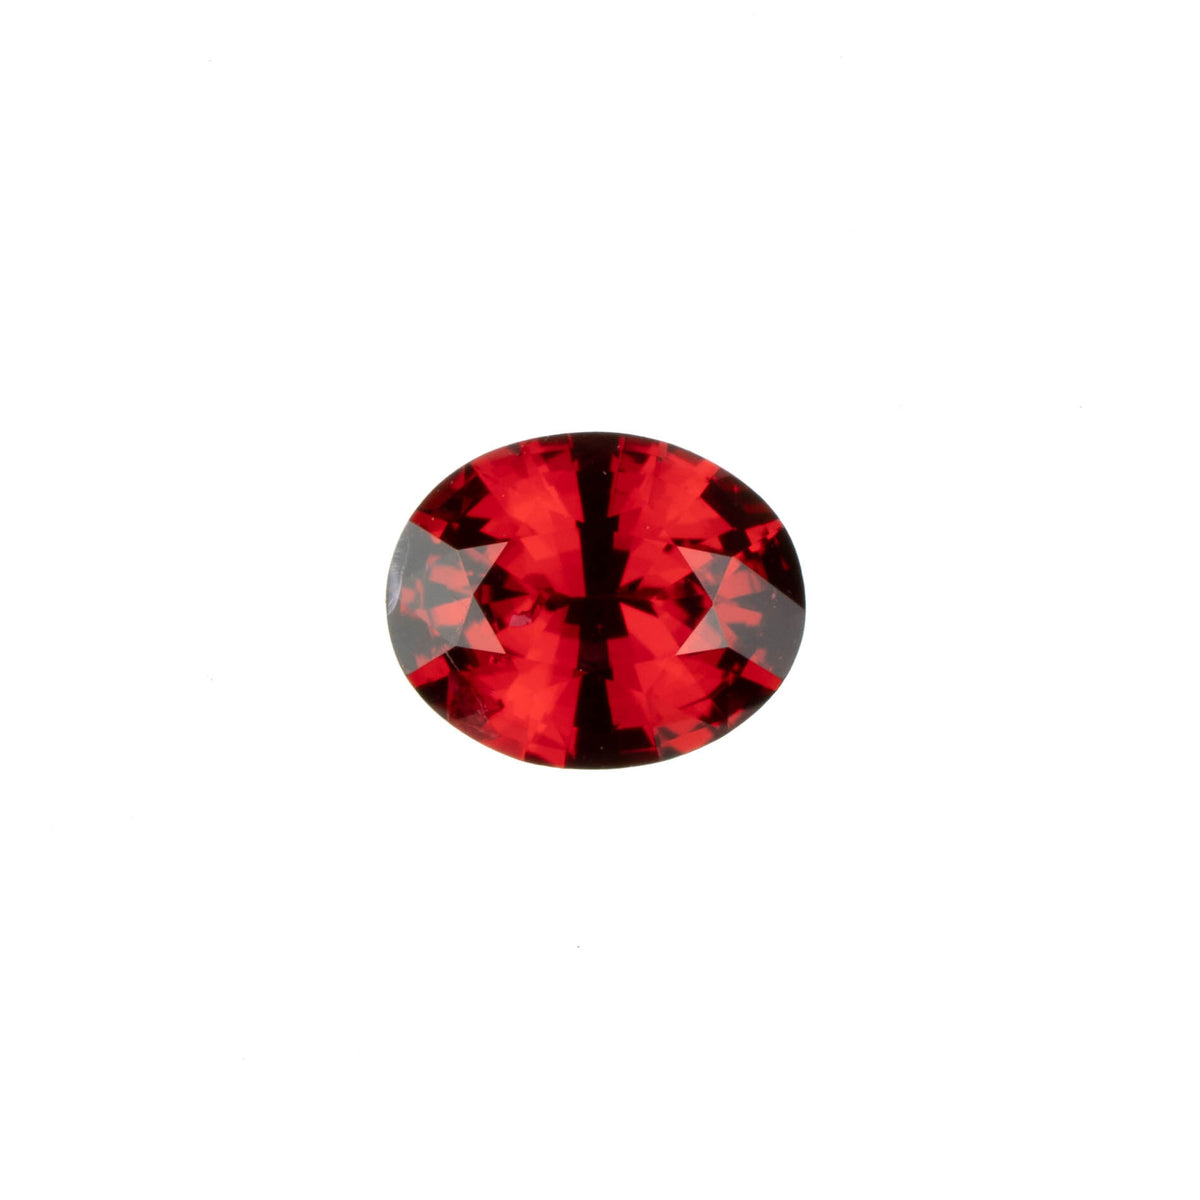 0.44ct Natural Vivid Red Spinel